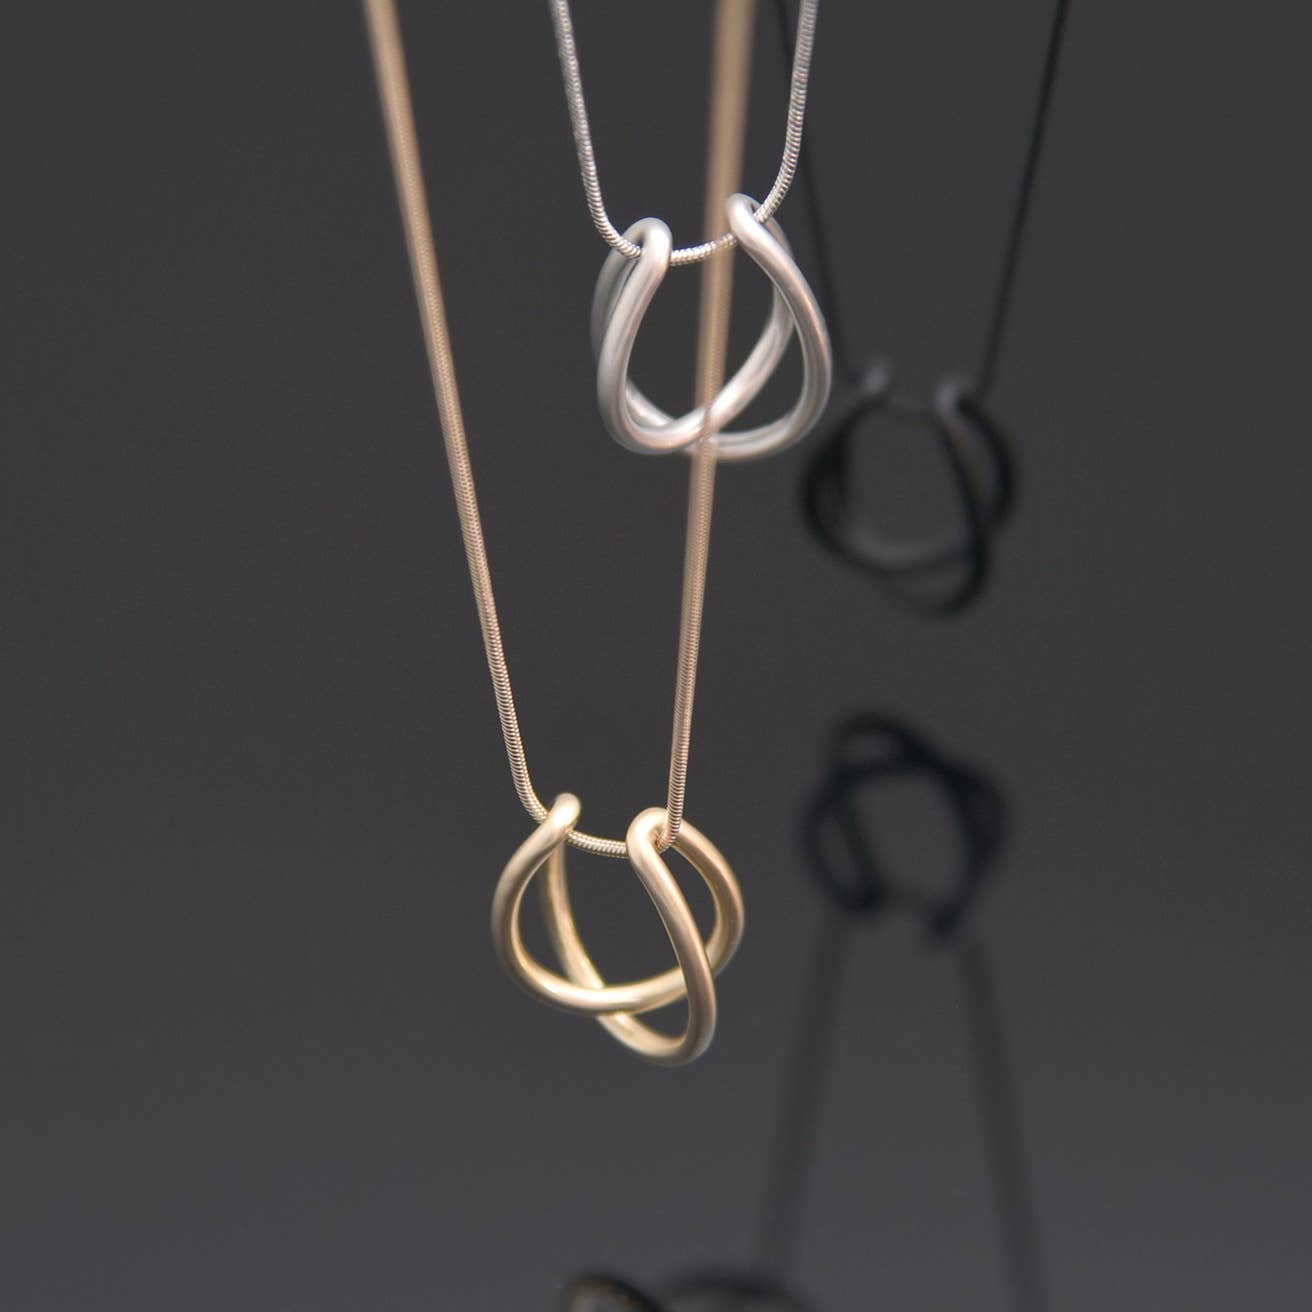 Twine Necklace - Satin Silver